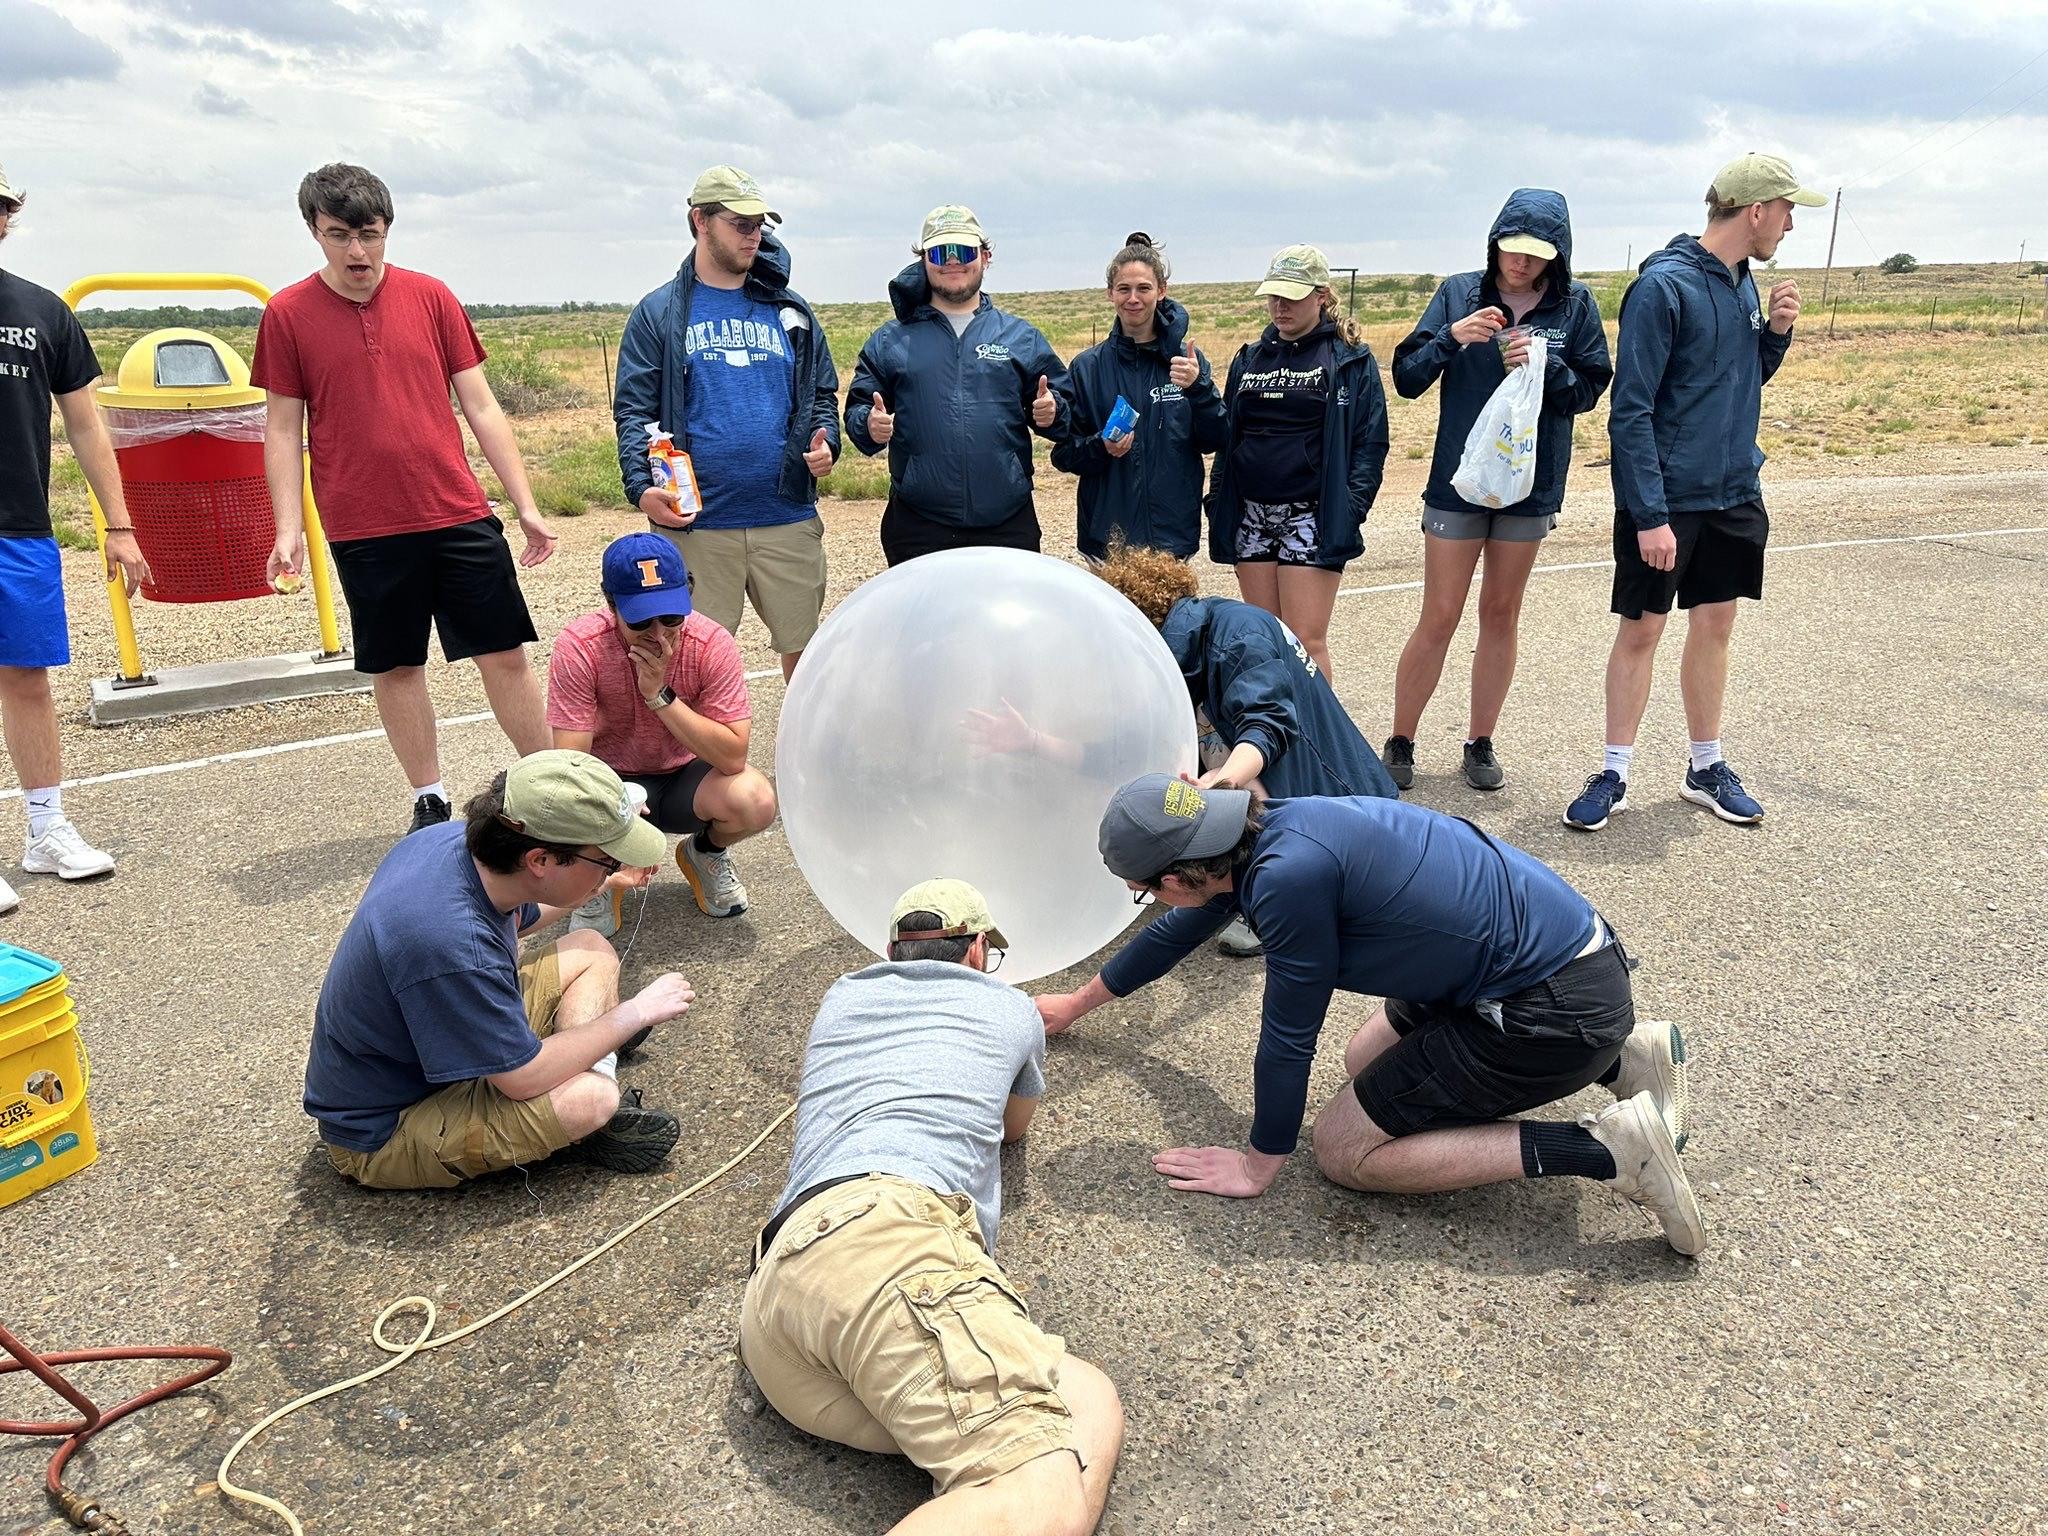 Oswego chasers launch a weather balloon in Fort Sumner, New Mexico.